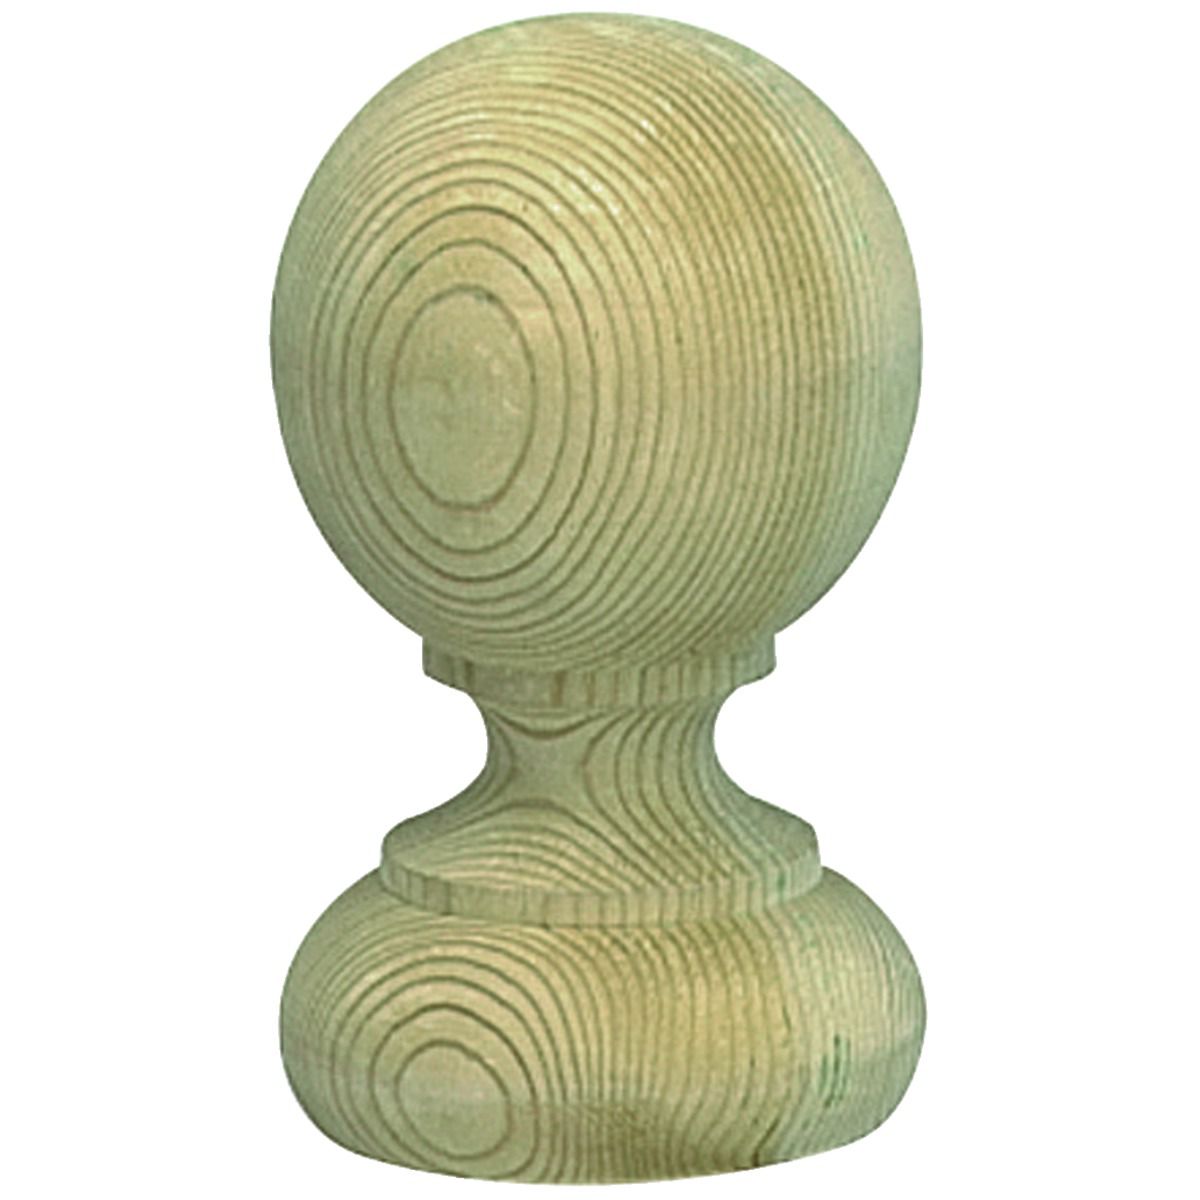 Image of Wickes Deck Post Ball - Green 77 x 77 x 128mm